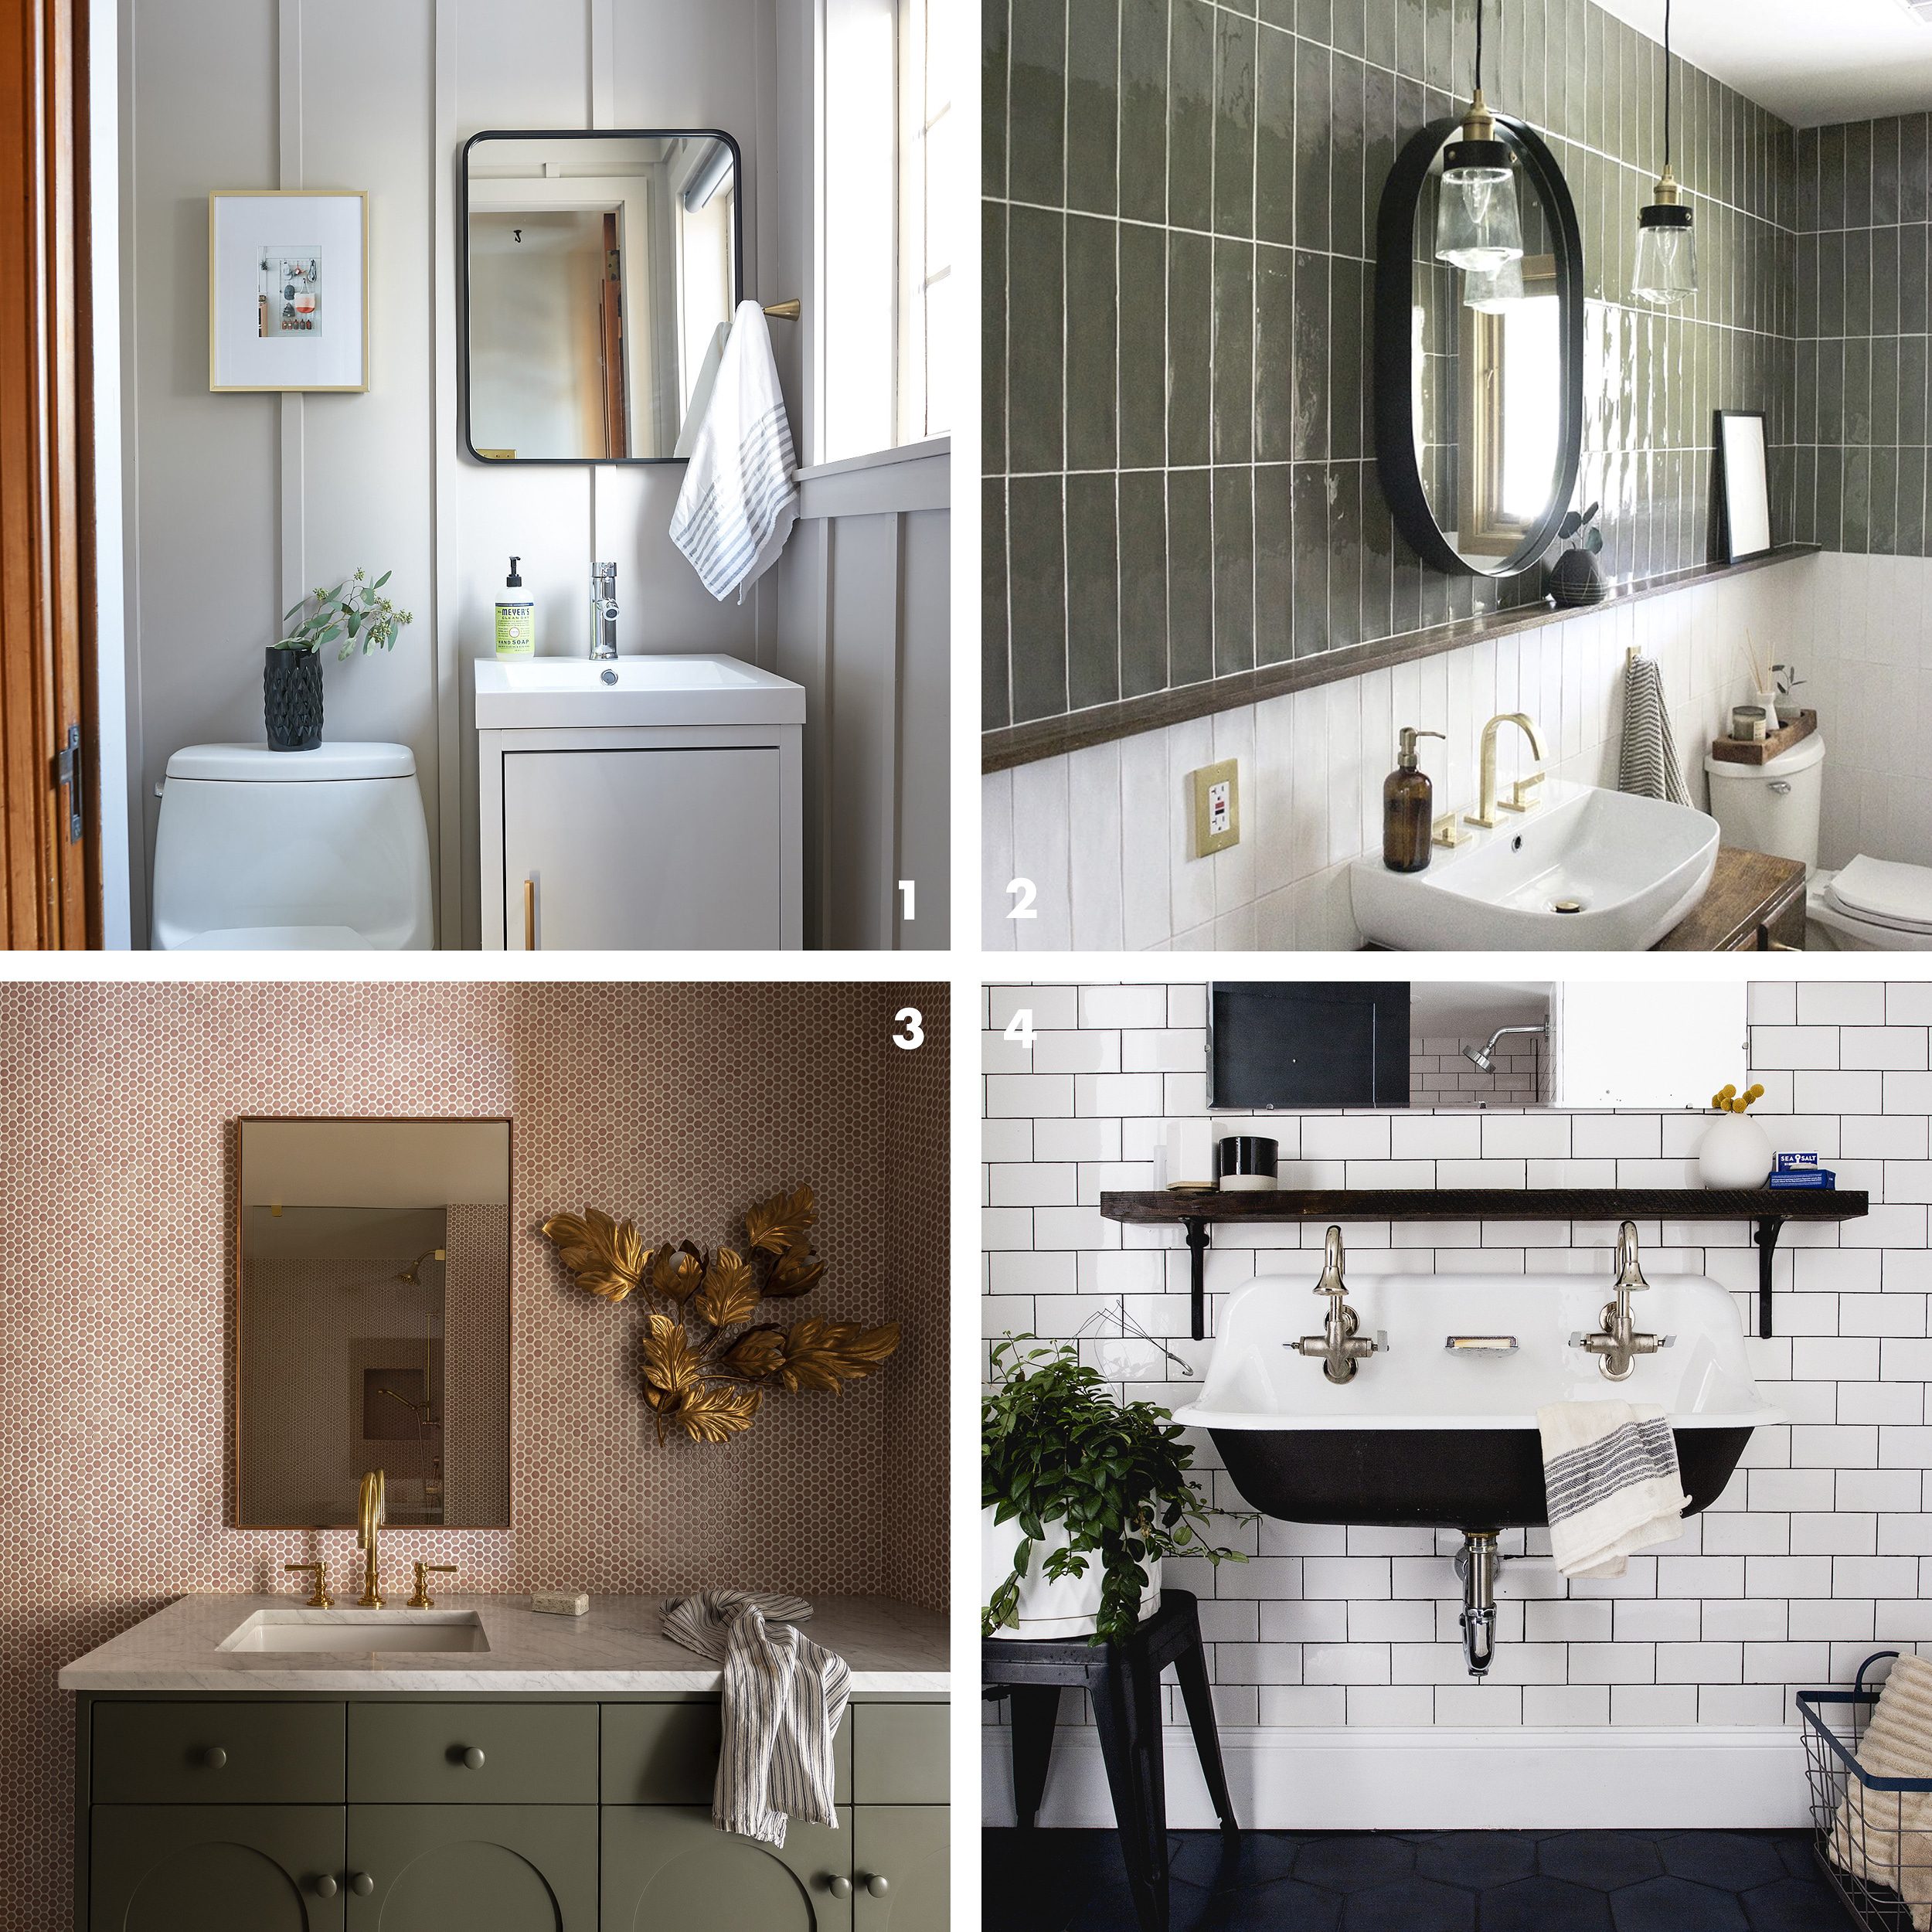 An image of 4 bathrooms that have inspired the decisions we're making for our bathroom renovation // via Yellow Brick Home